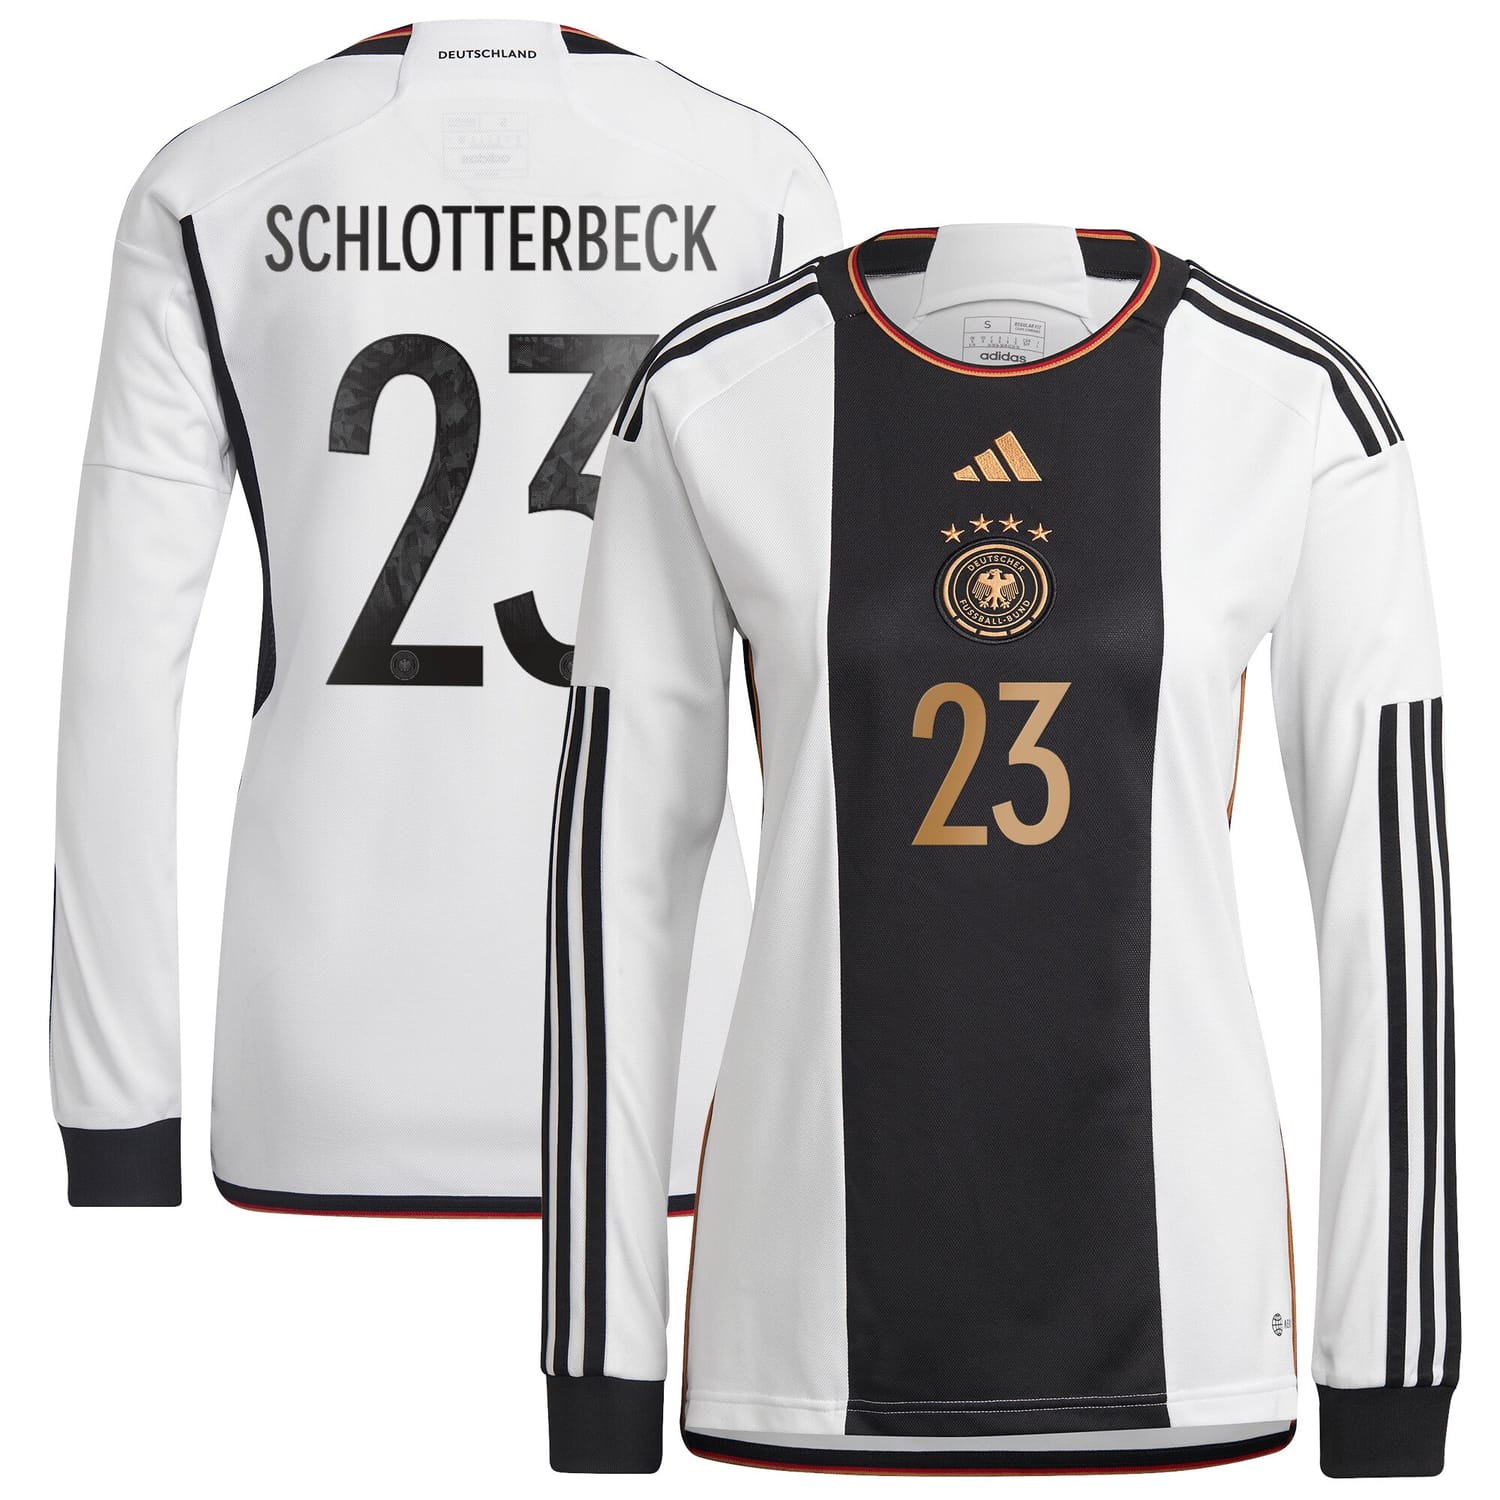 Germany National Team Home Jersey Shirt Long Sleeve player Nico Schlotterbeck 23 printing for Women